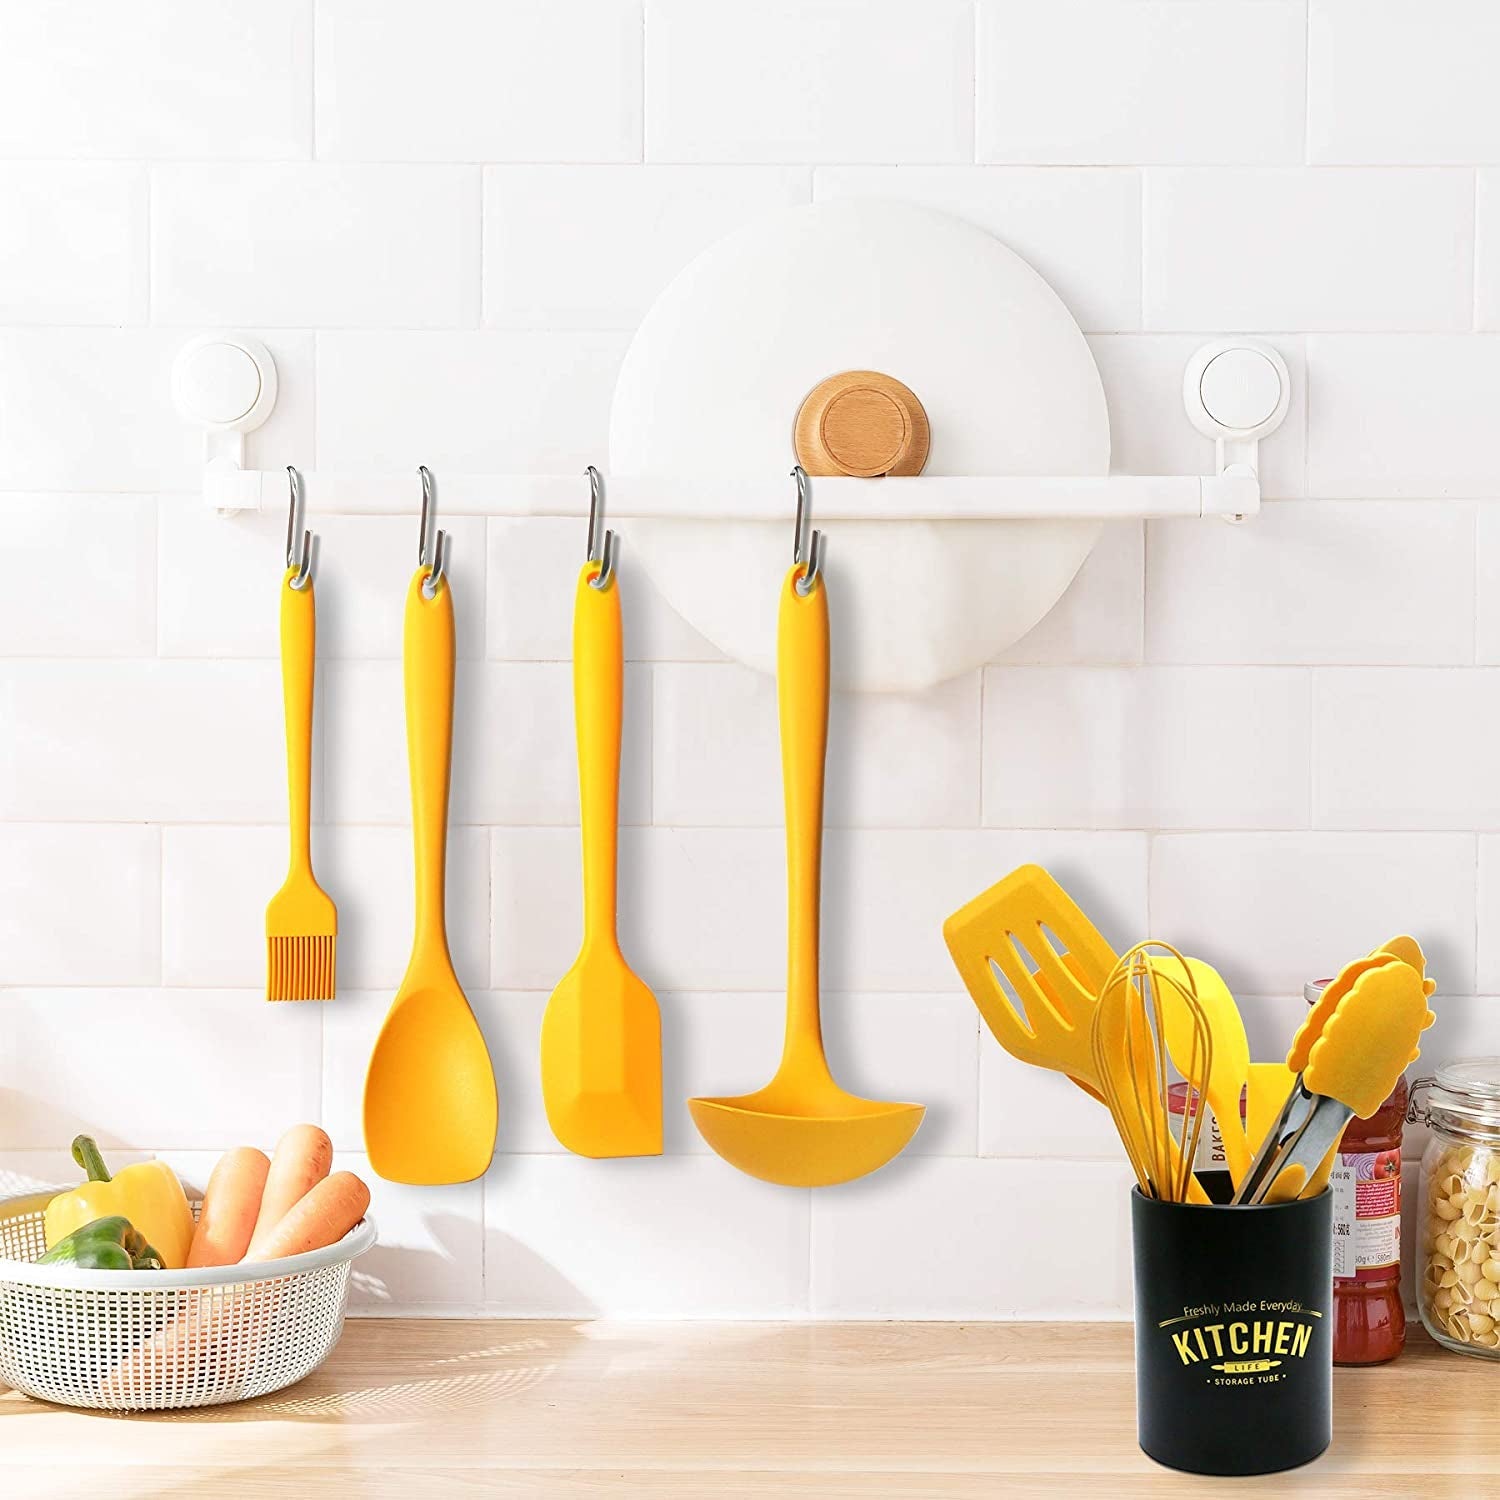 14 Pcs Silicone Cooking Kitchen Utensils Set with Holder, Wooden Handles  BPA Free Non Toxic Silicone Turner Tongs Spatula Spoon Kitchen Gadgets Utensil  Set for Nonstick Cookware (Khaki)